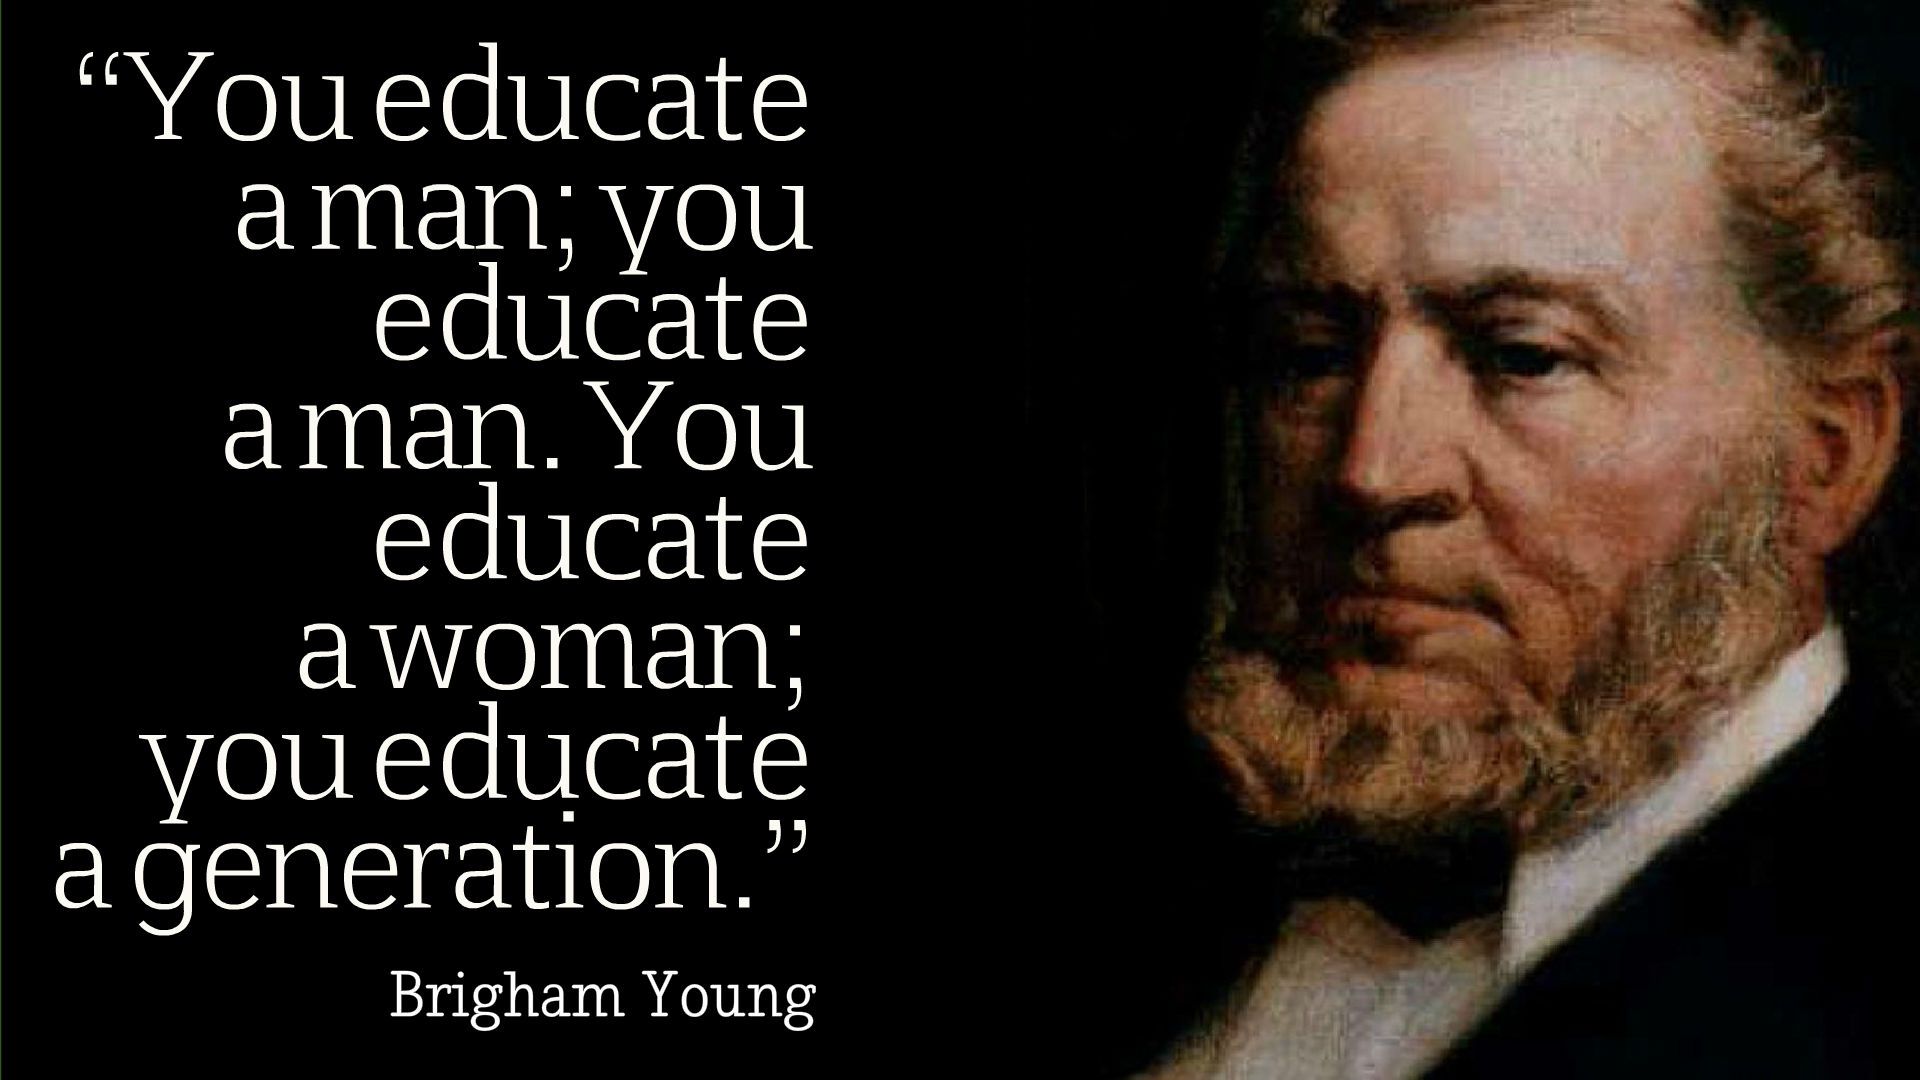 Brigham Young Educate A Women Quotes Wallpaper 05651